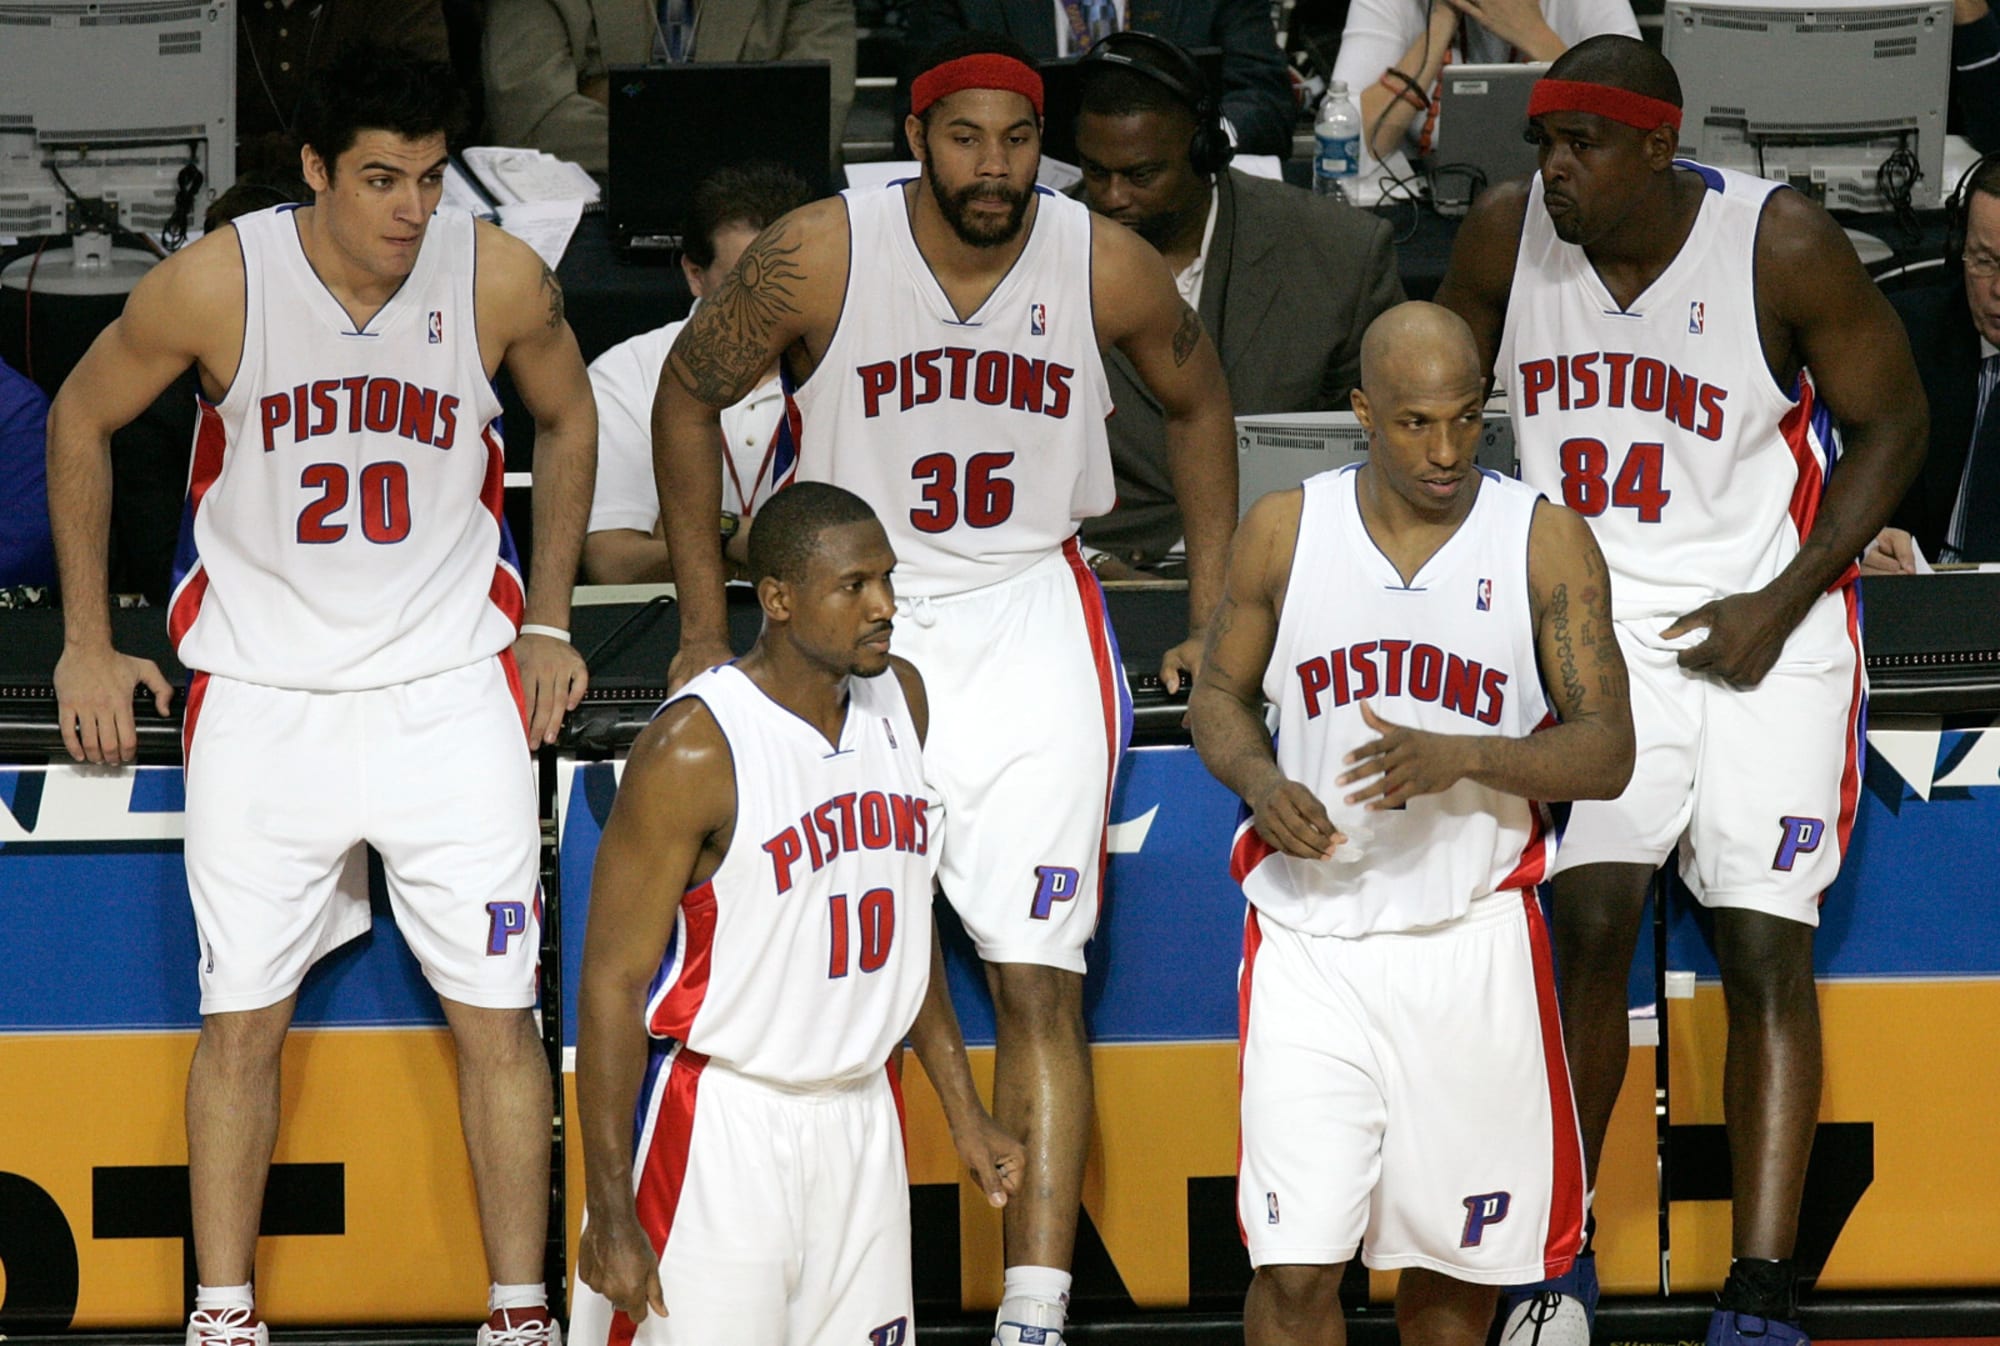 A Big Deal: Pistons deadline acquisition of Rasheed Wallace shook the NBA –  and brought another banner to Detroit